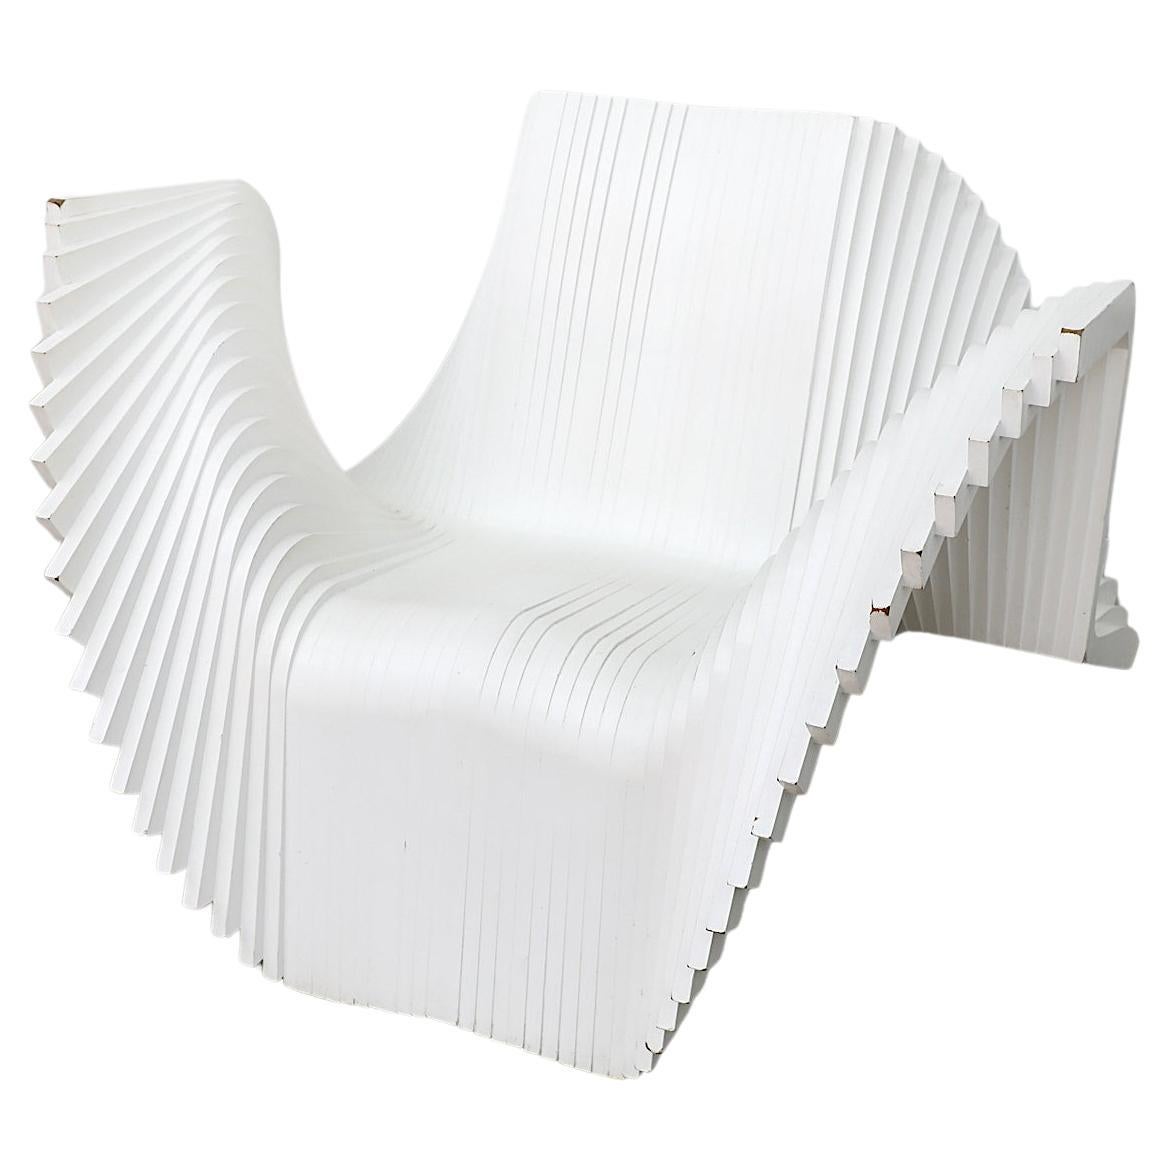 Marilyn Monroe Style Chair Inspired by Alexander White